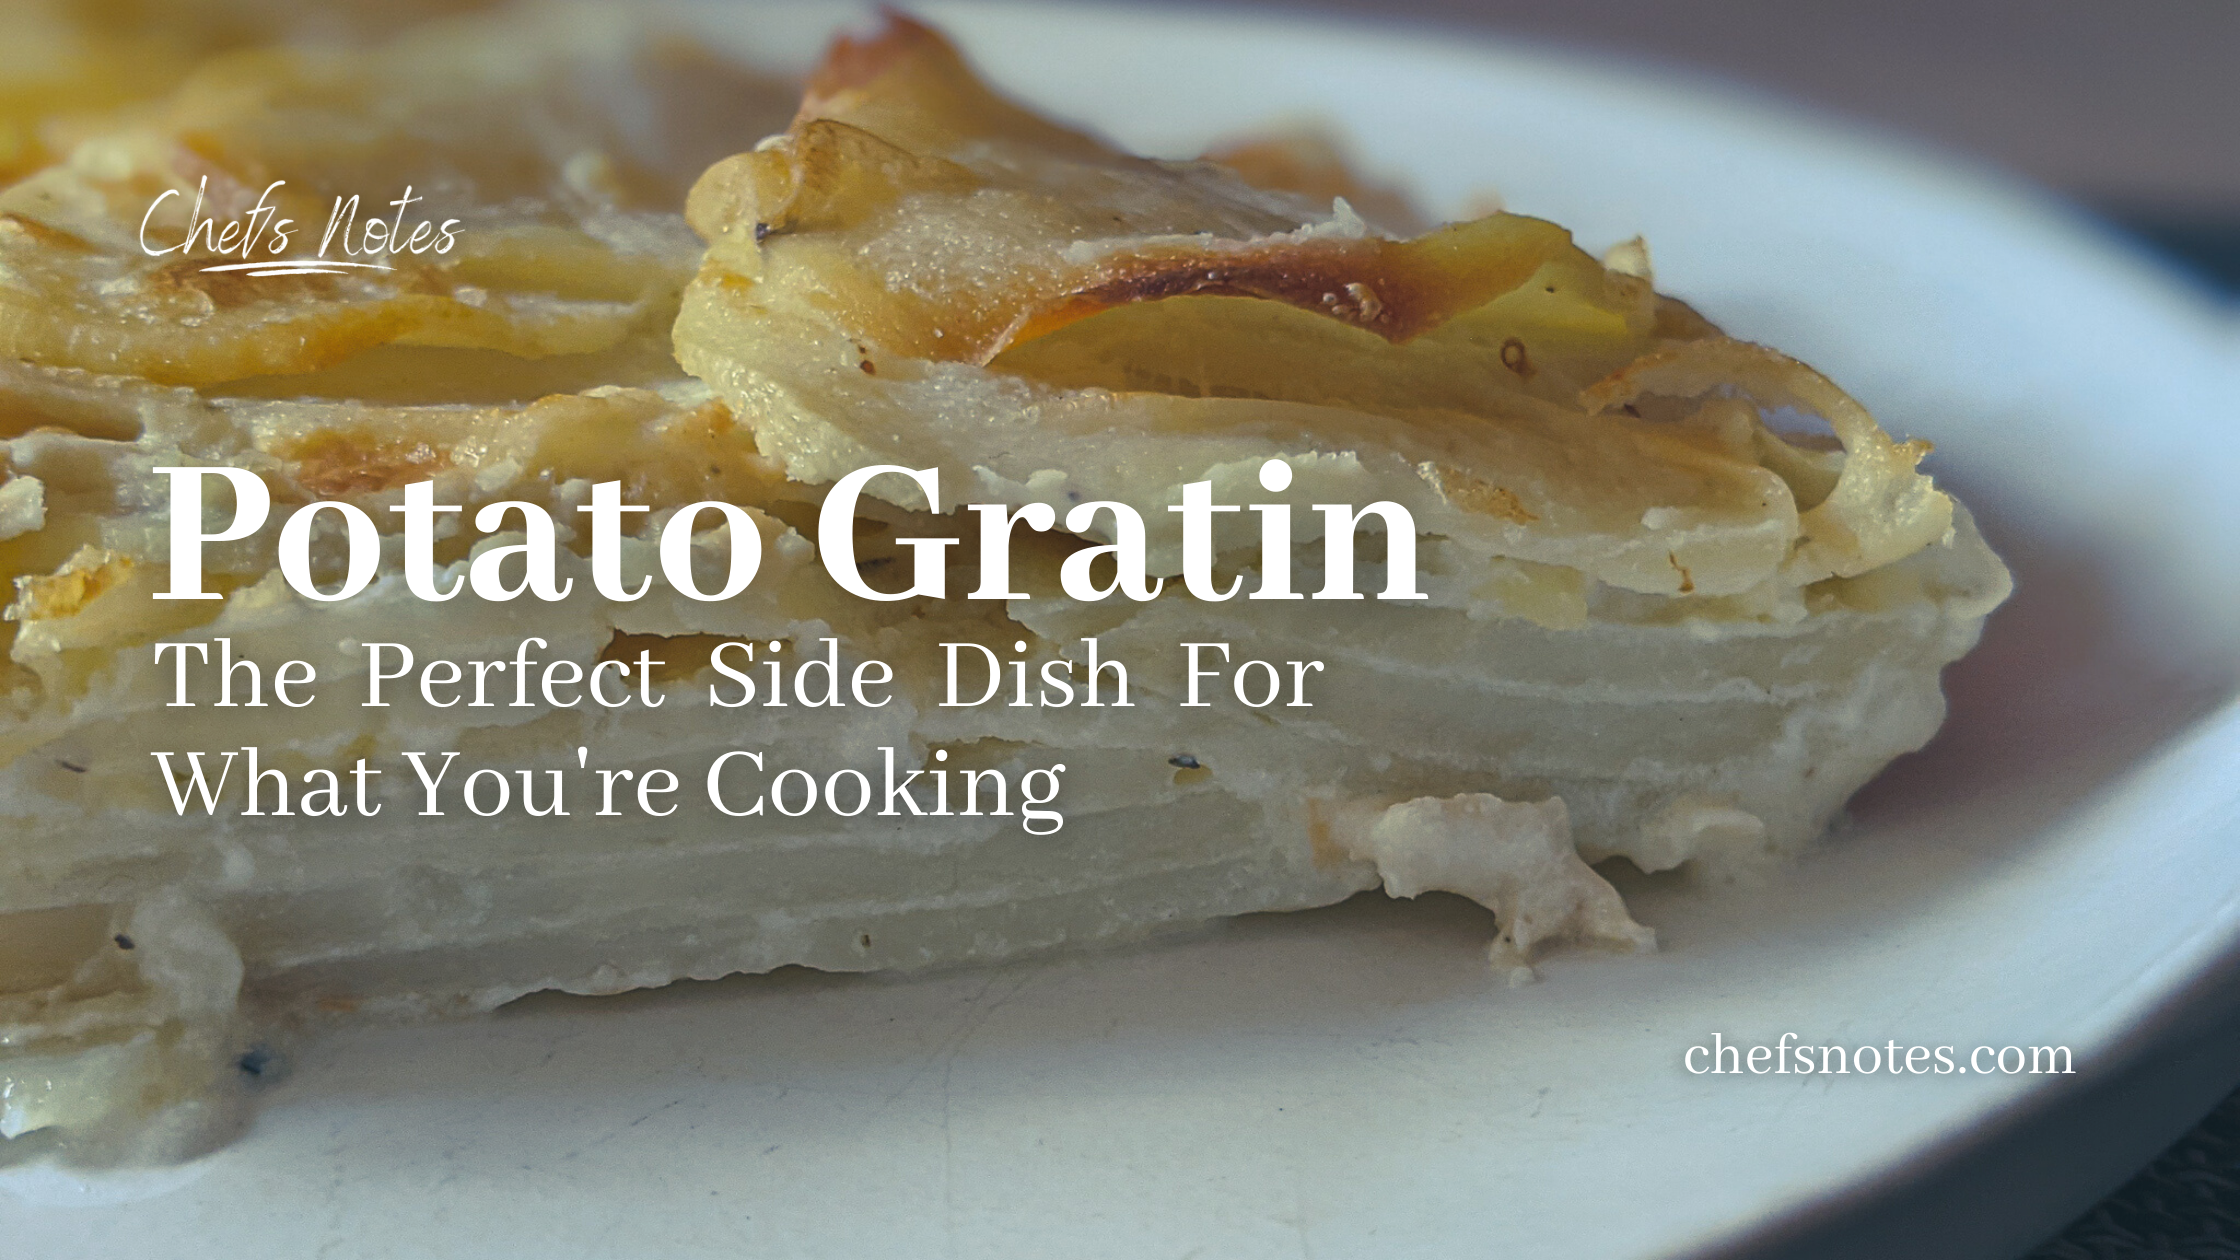 Potato Gratin – The Perfect Side Dish For What You’re Cooking